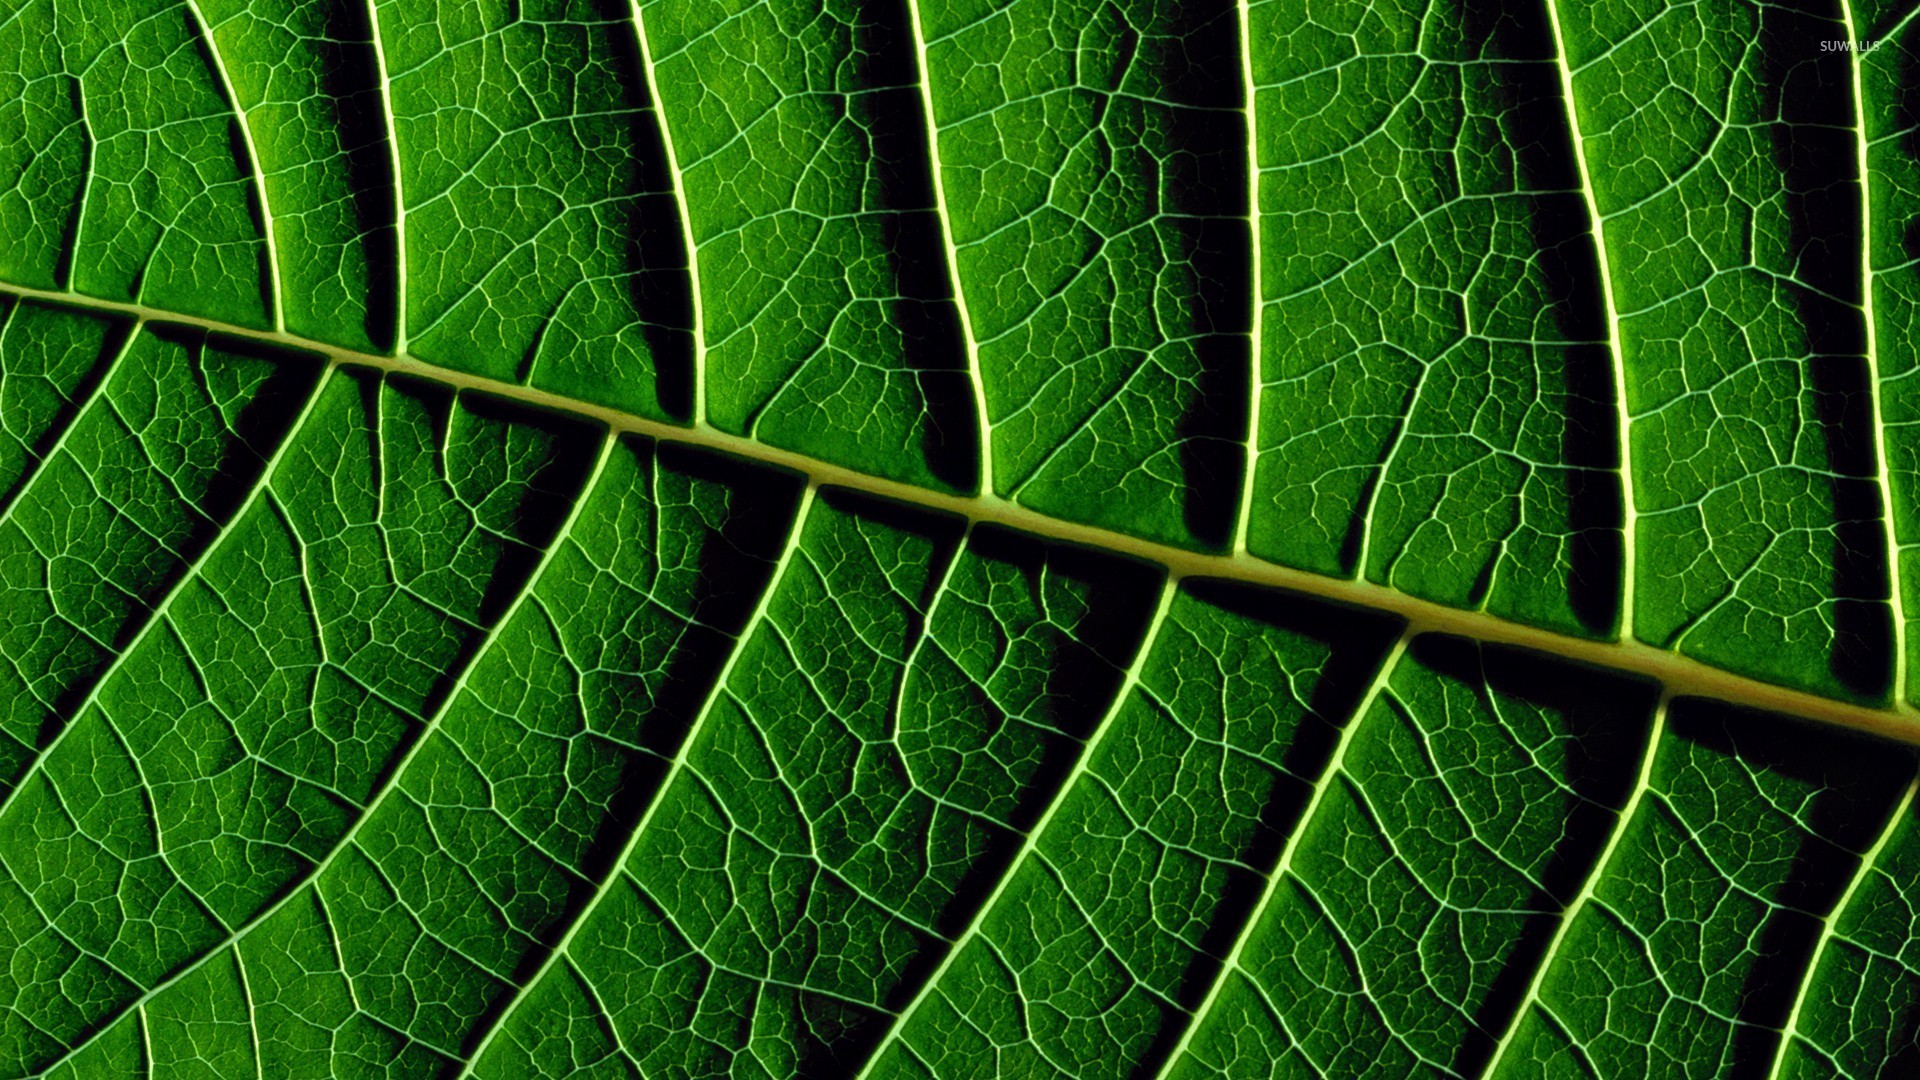 Leaf veins wallpaper - Photography wallpapers - #24446